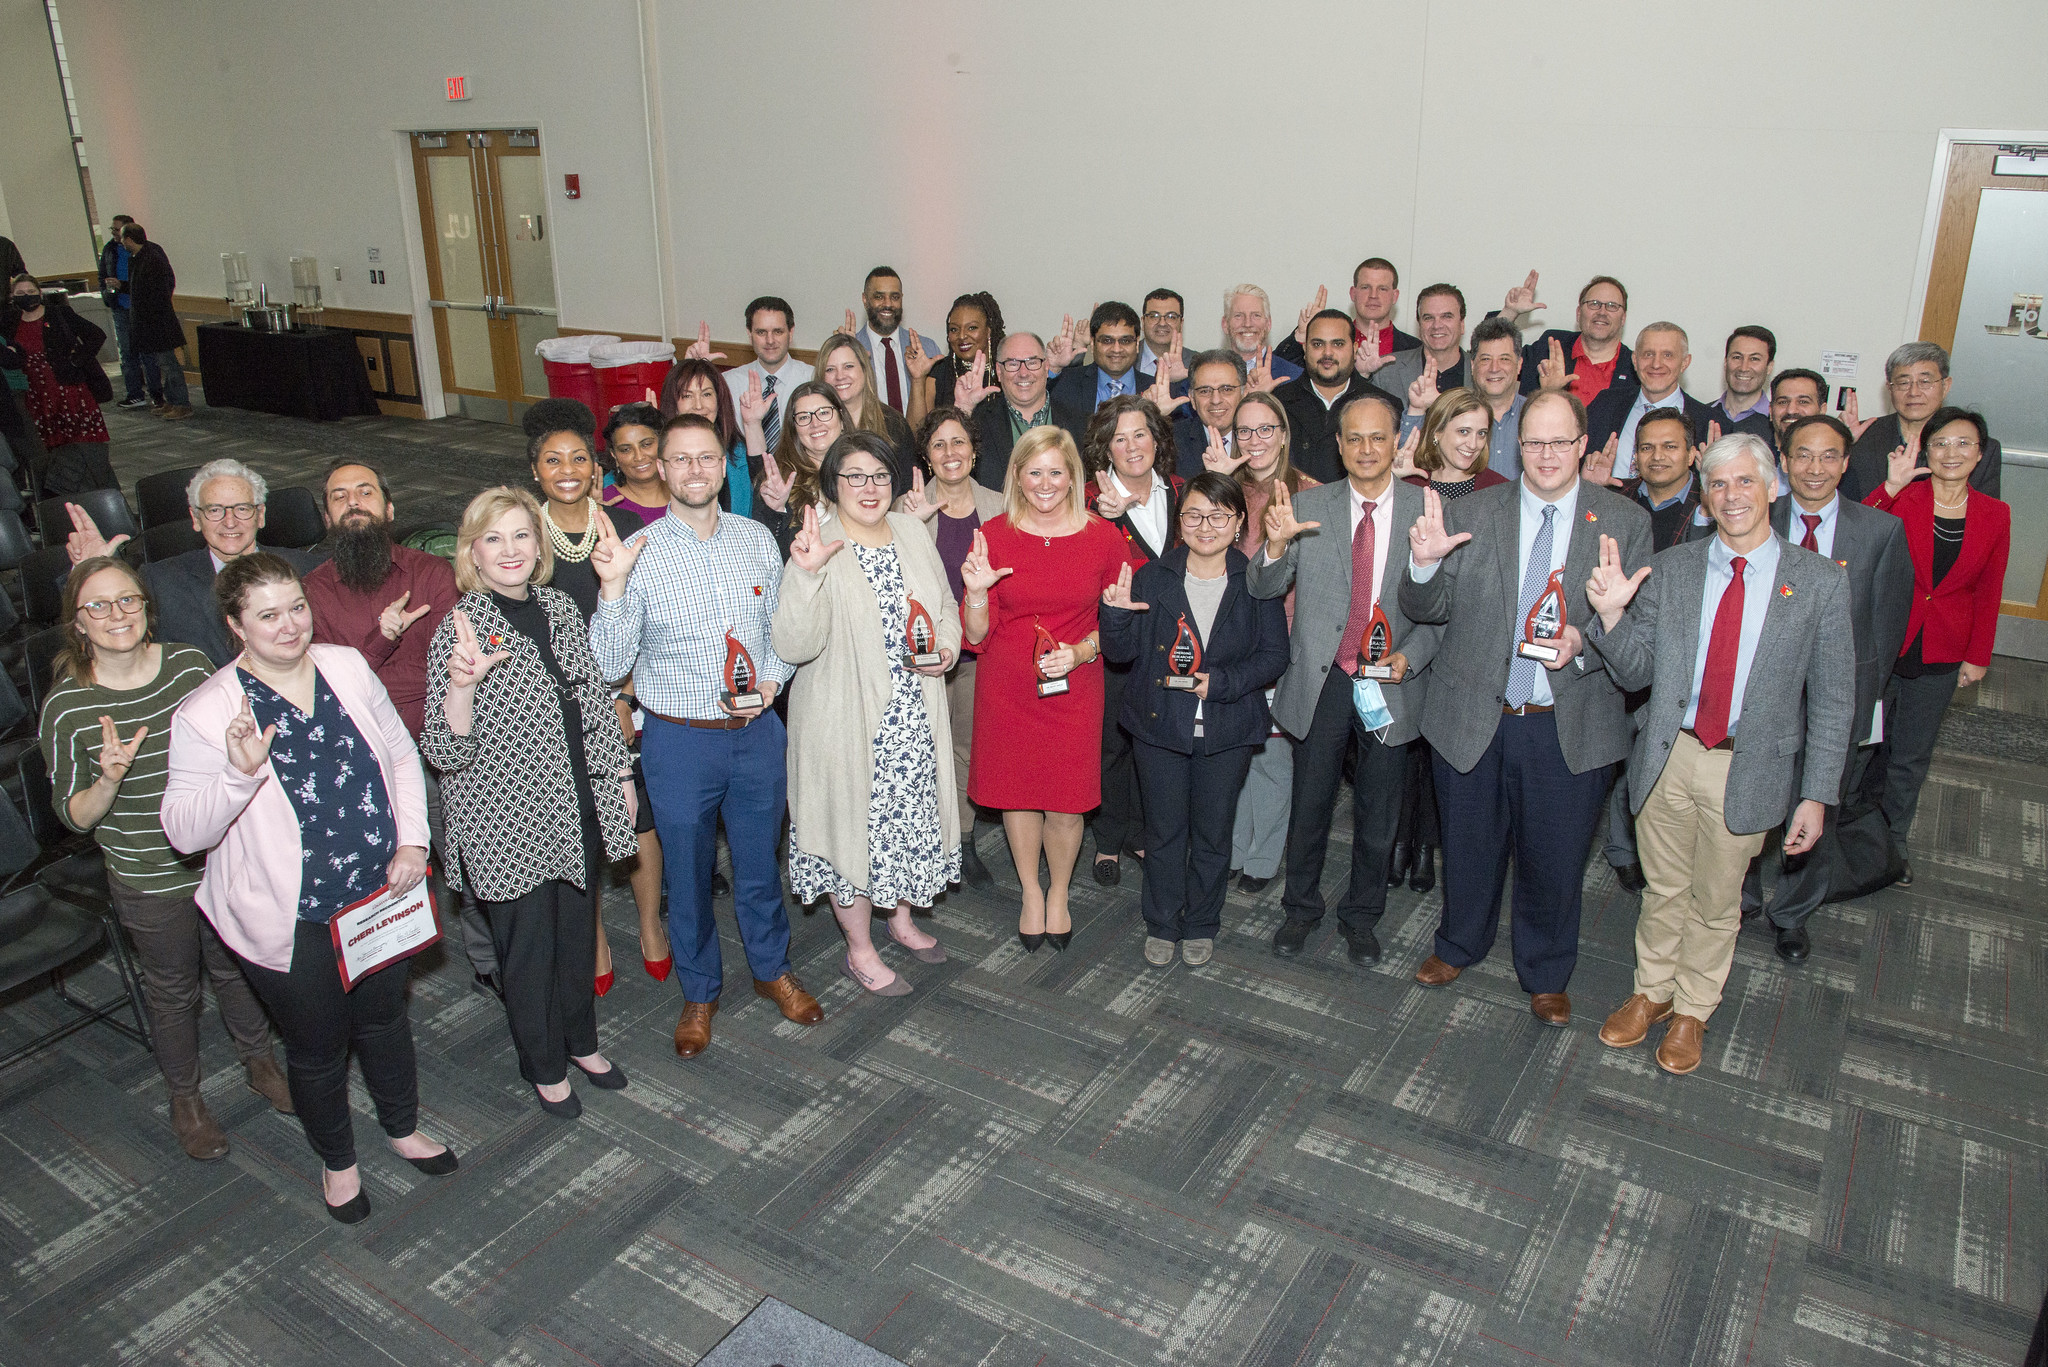 More than 90 faculty and staff were honored at the inaugural UofL Research and Scholarship Awards on March 29, 2022.